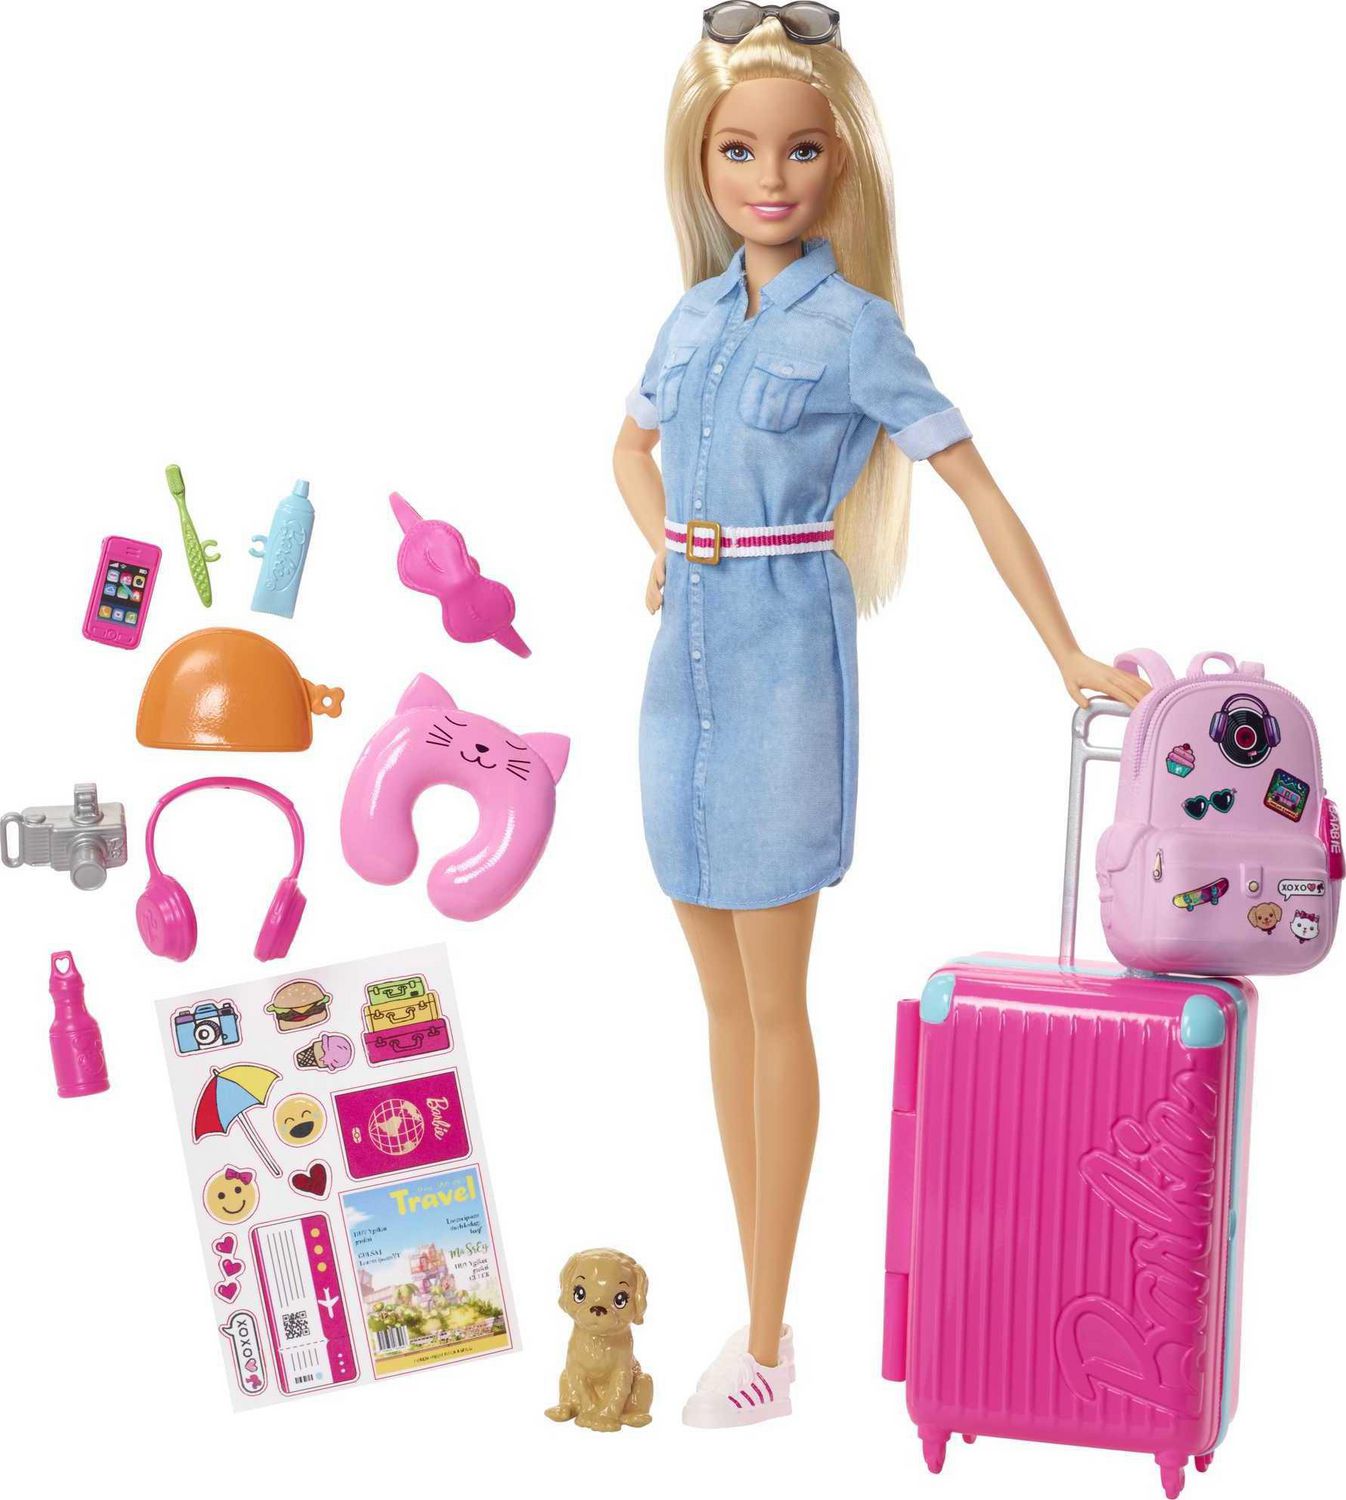 Barbie Travel Set Dreamhouse Adventures from Mattel Barbie and Accessories Toy 